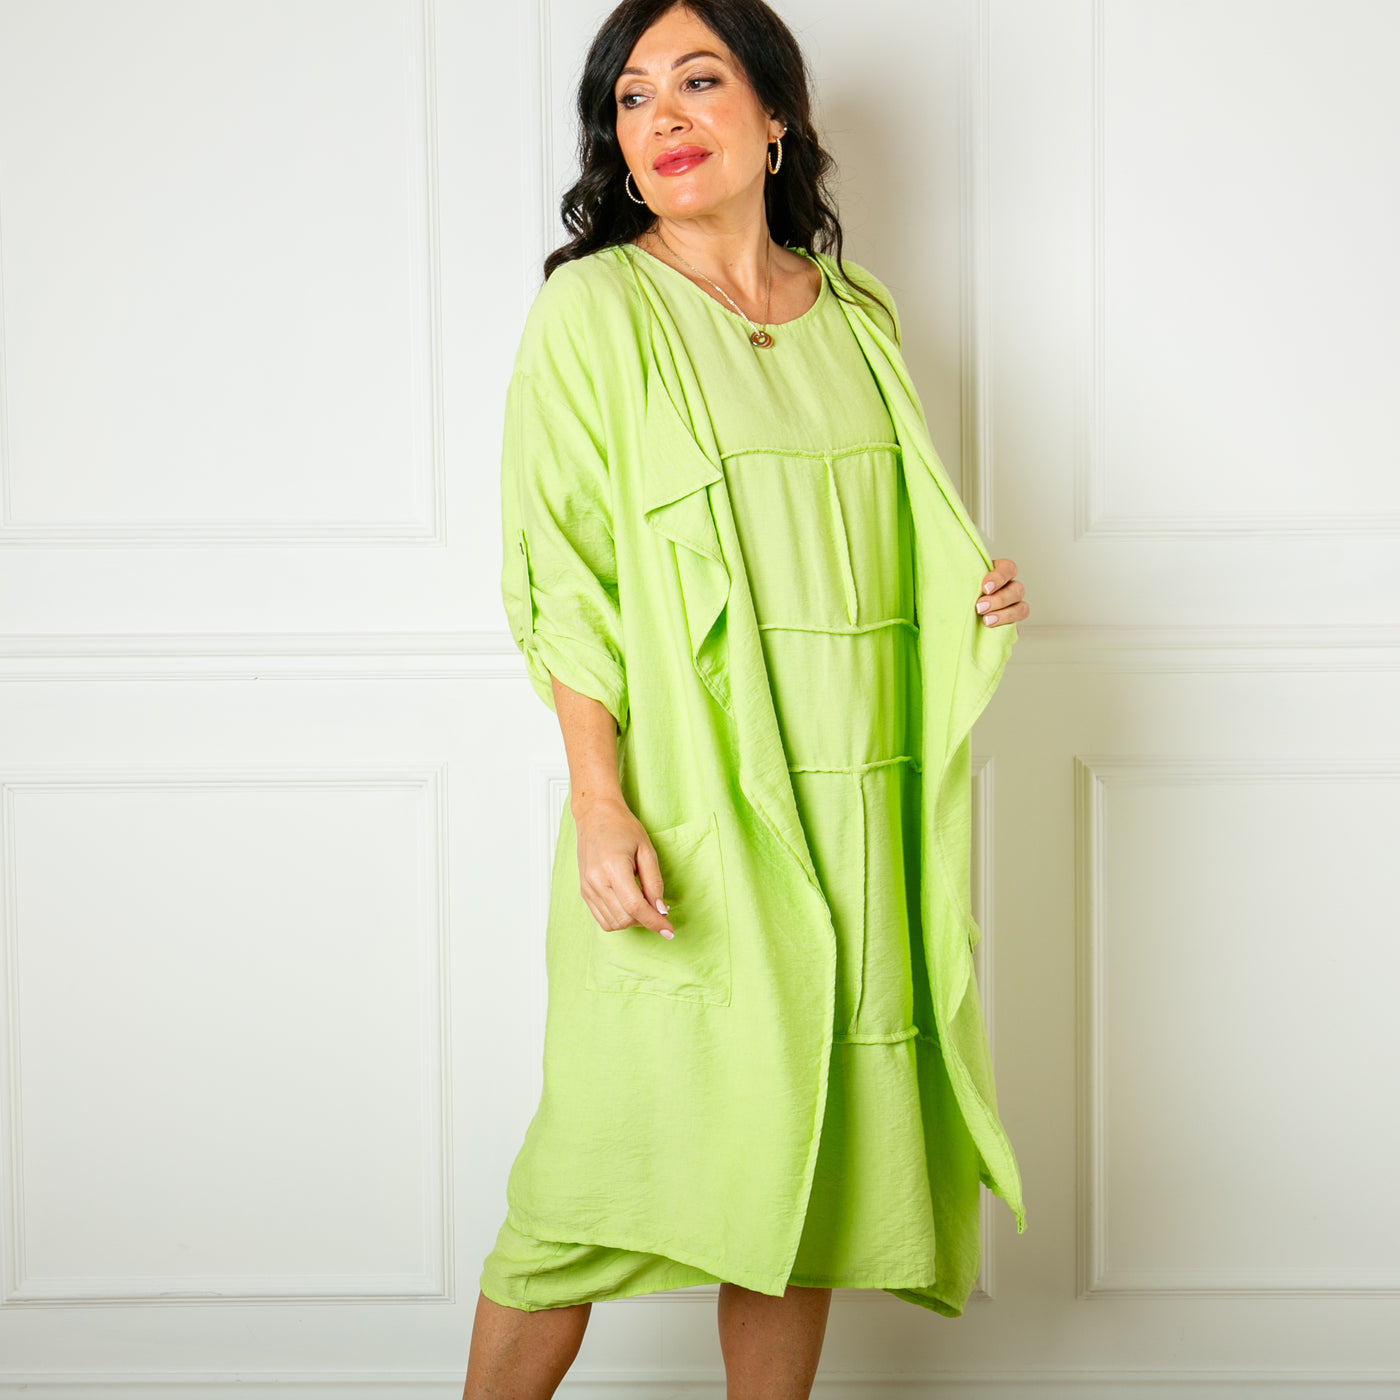 The lime green Lightweight Waterfall Jacket which pairs perfectly with the Handkerchief Vest Top